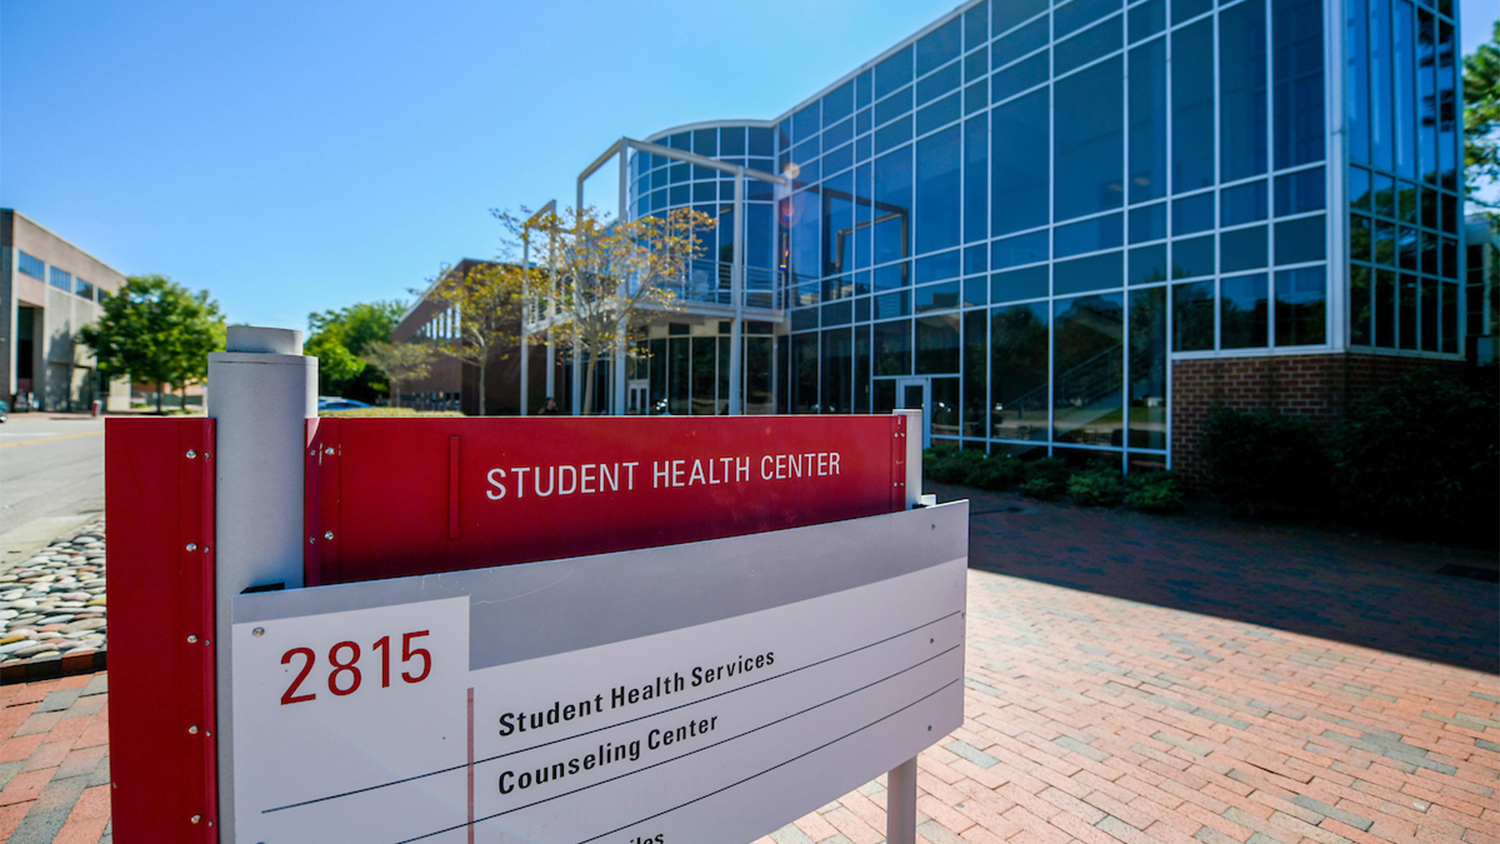 The exterior of the Student Health Center, with a sign that reads Student Health Center